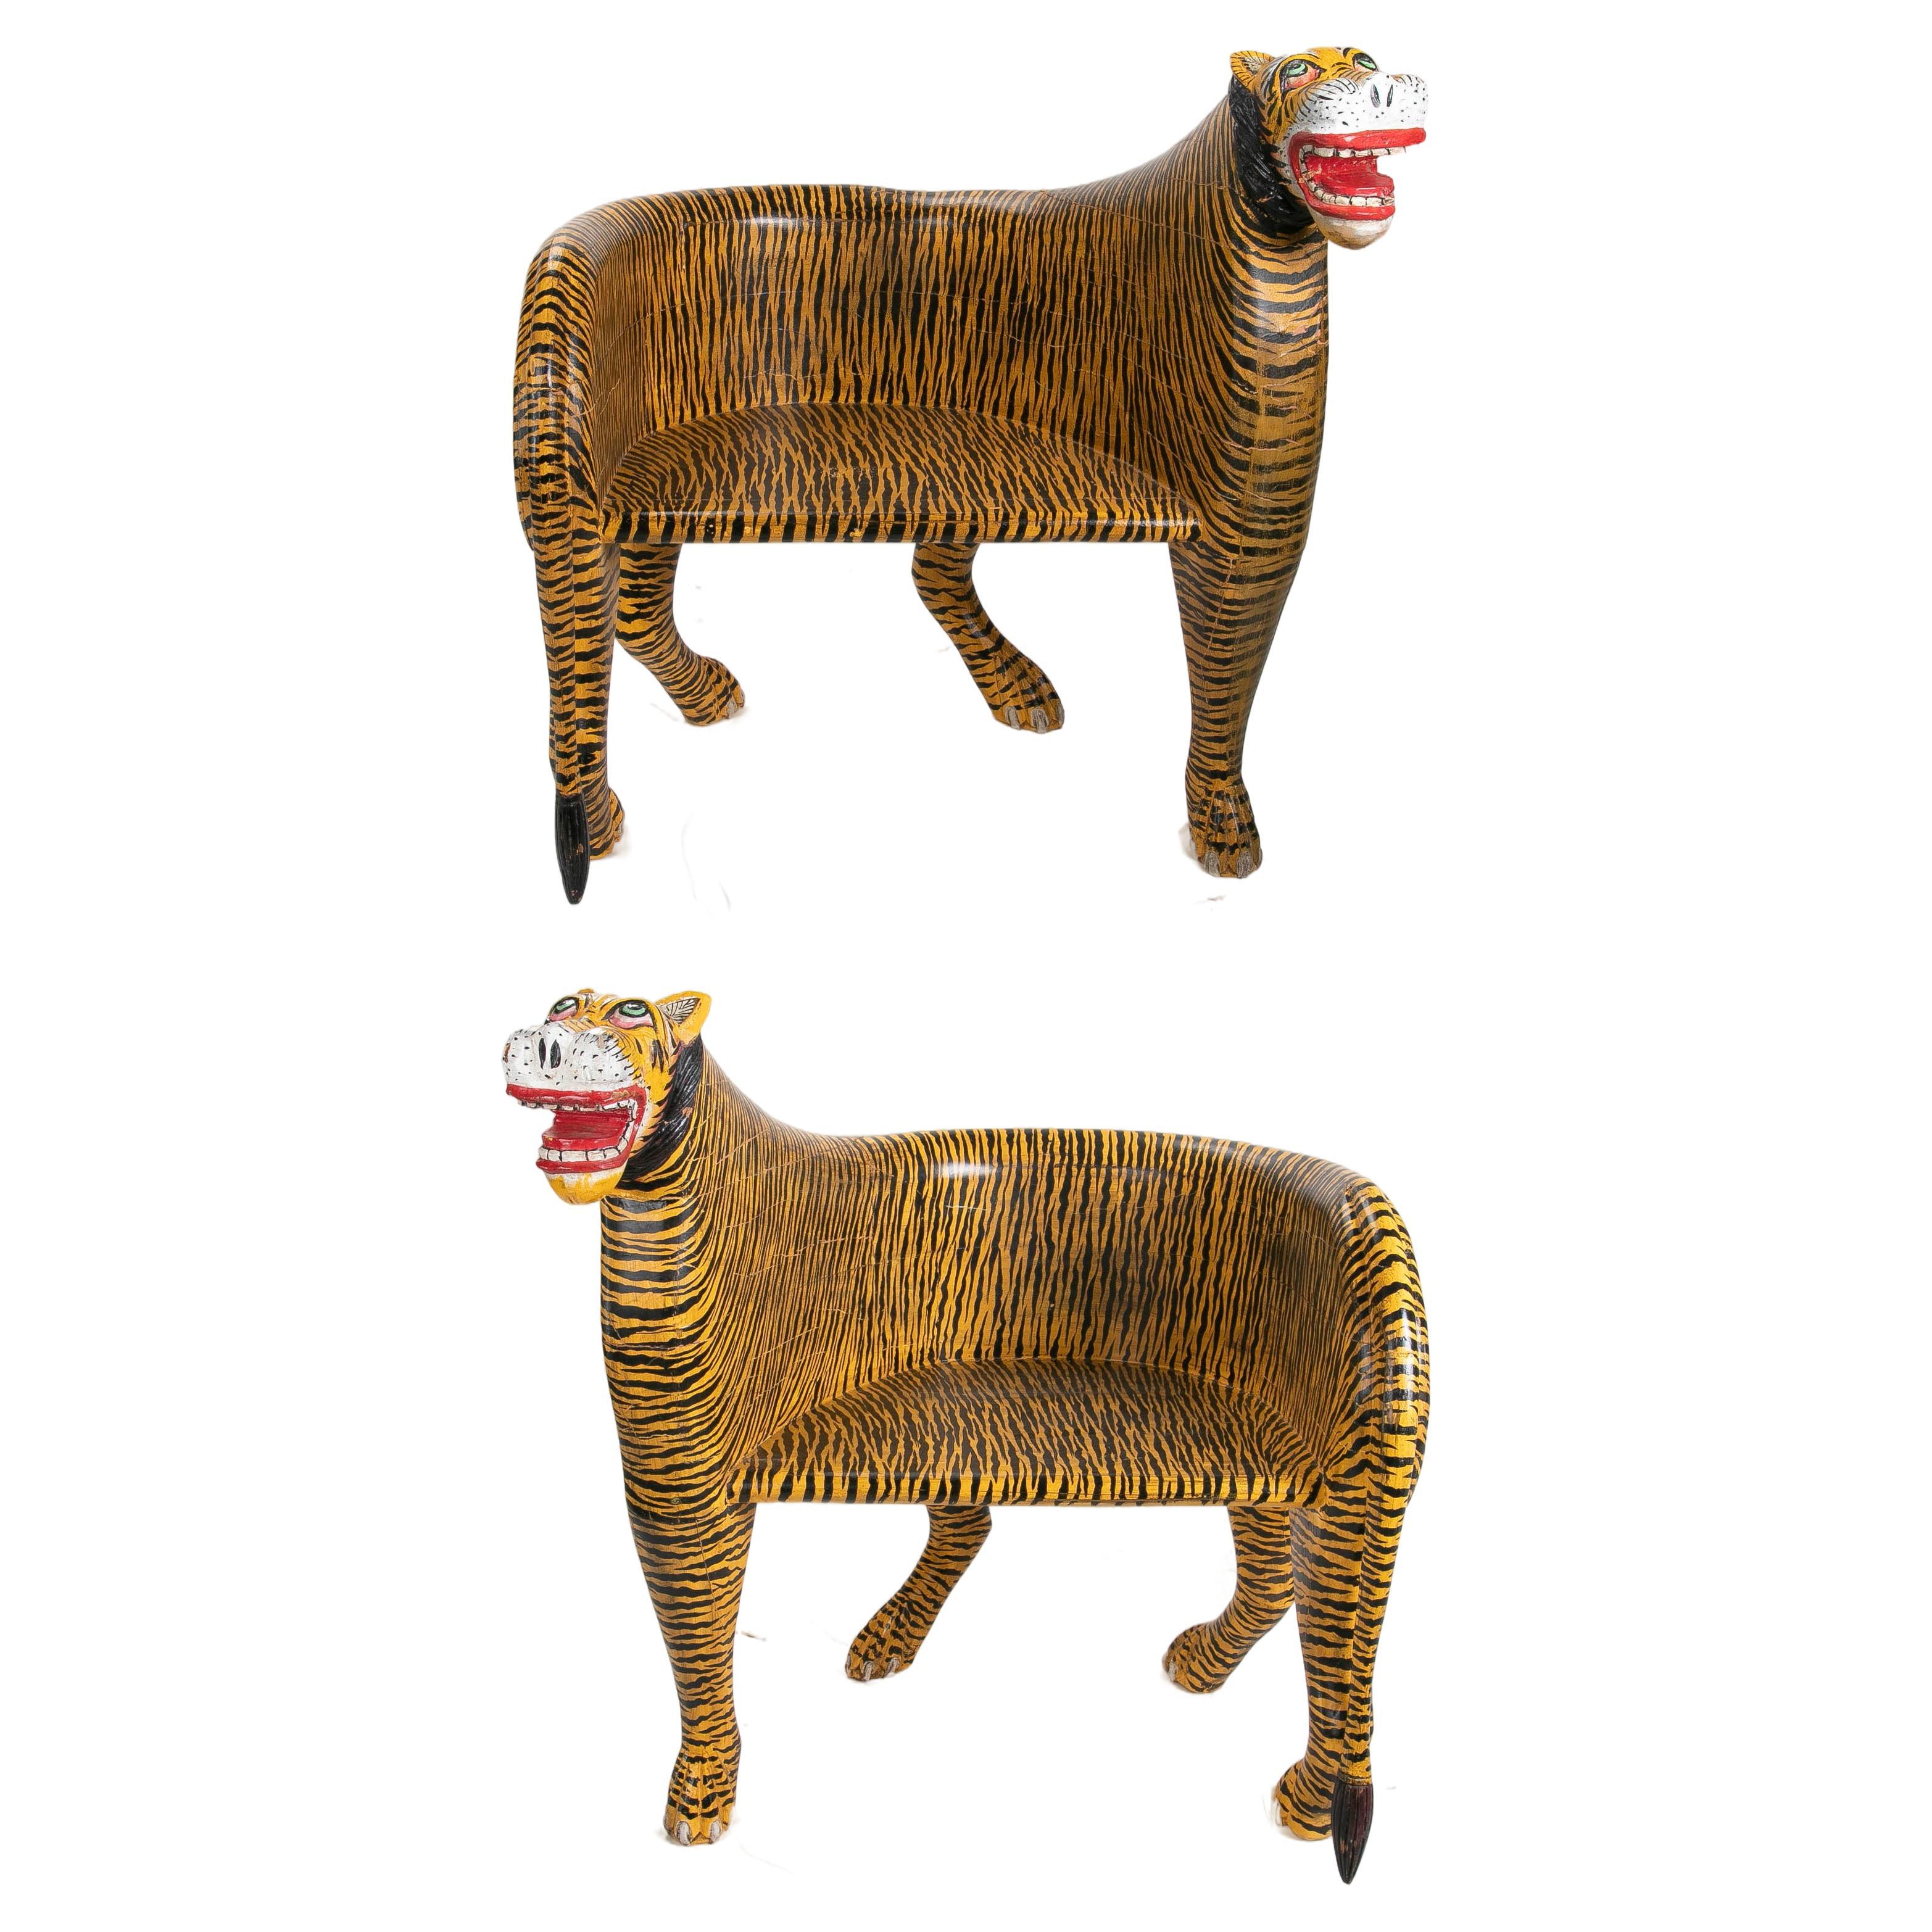 Pair of Hand-Carved and Hand-Painted Wooden Tiger Armchairs